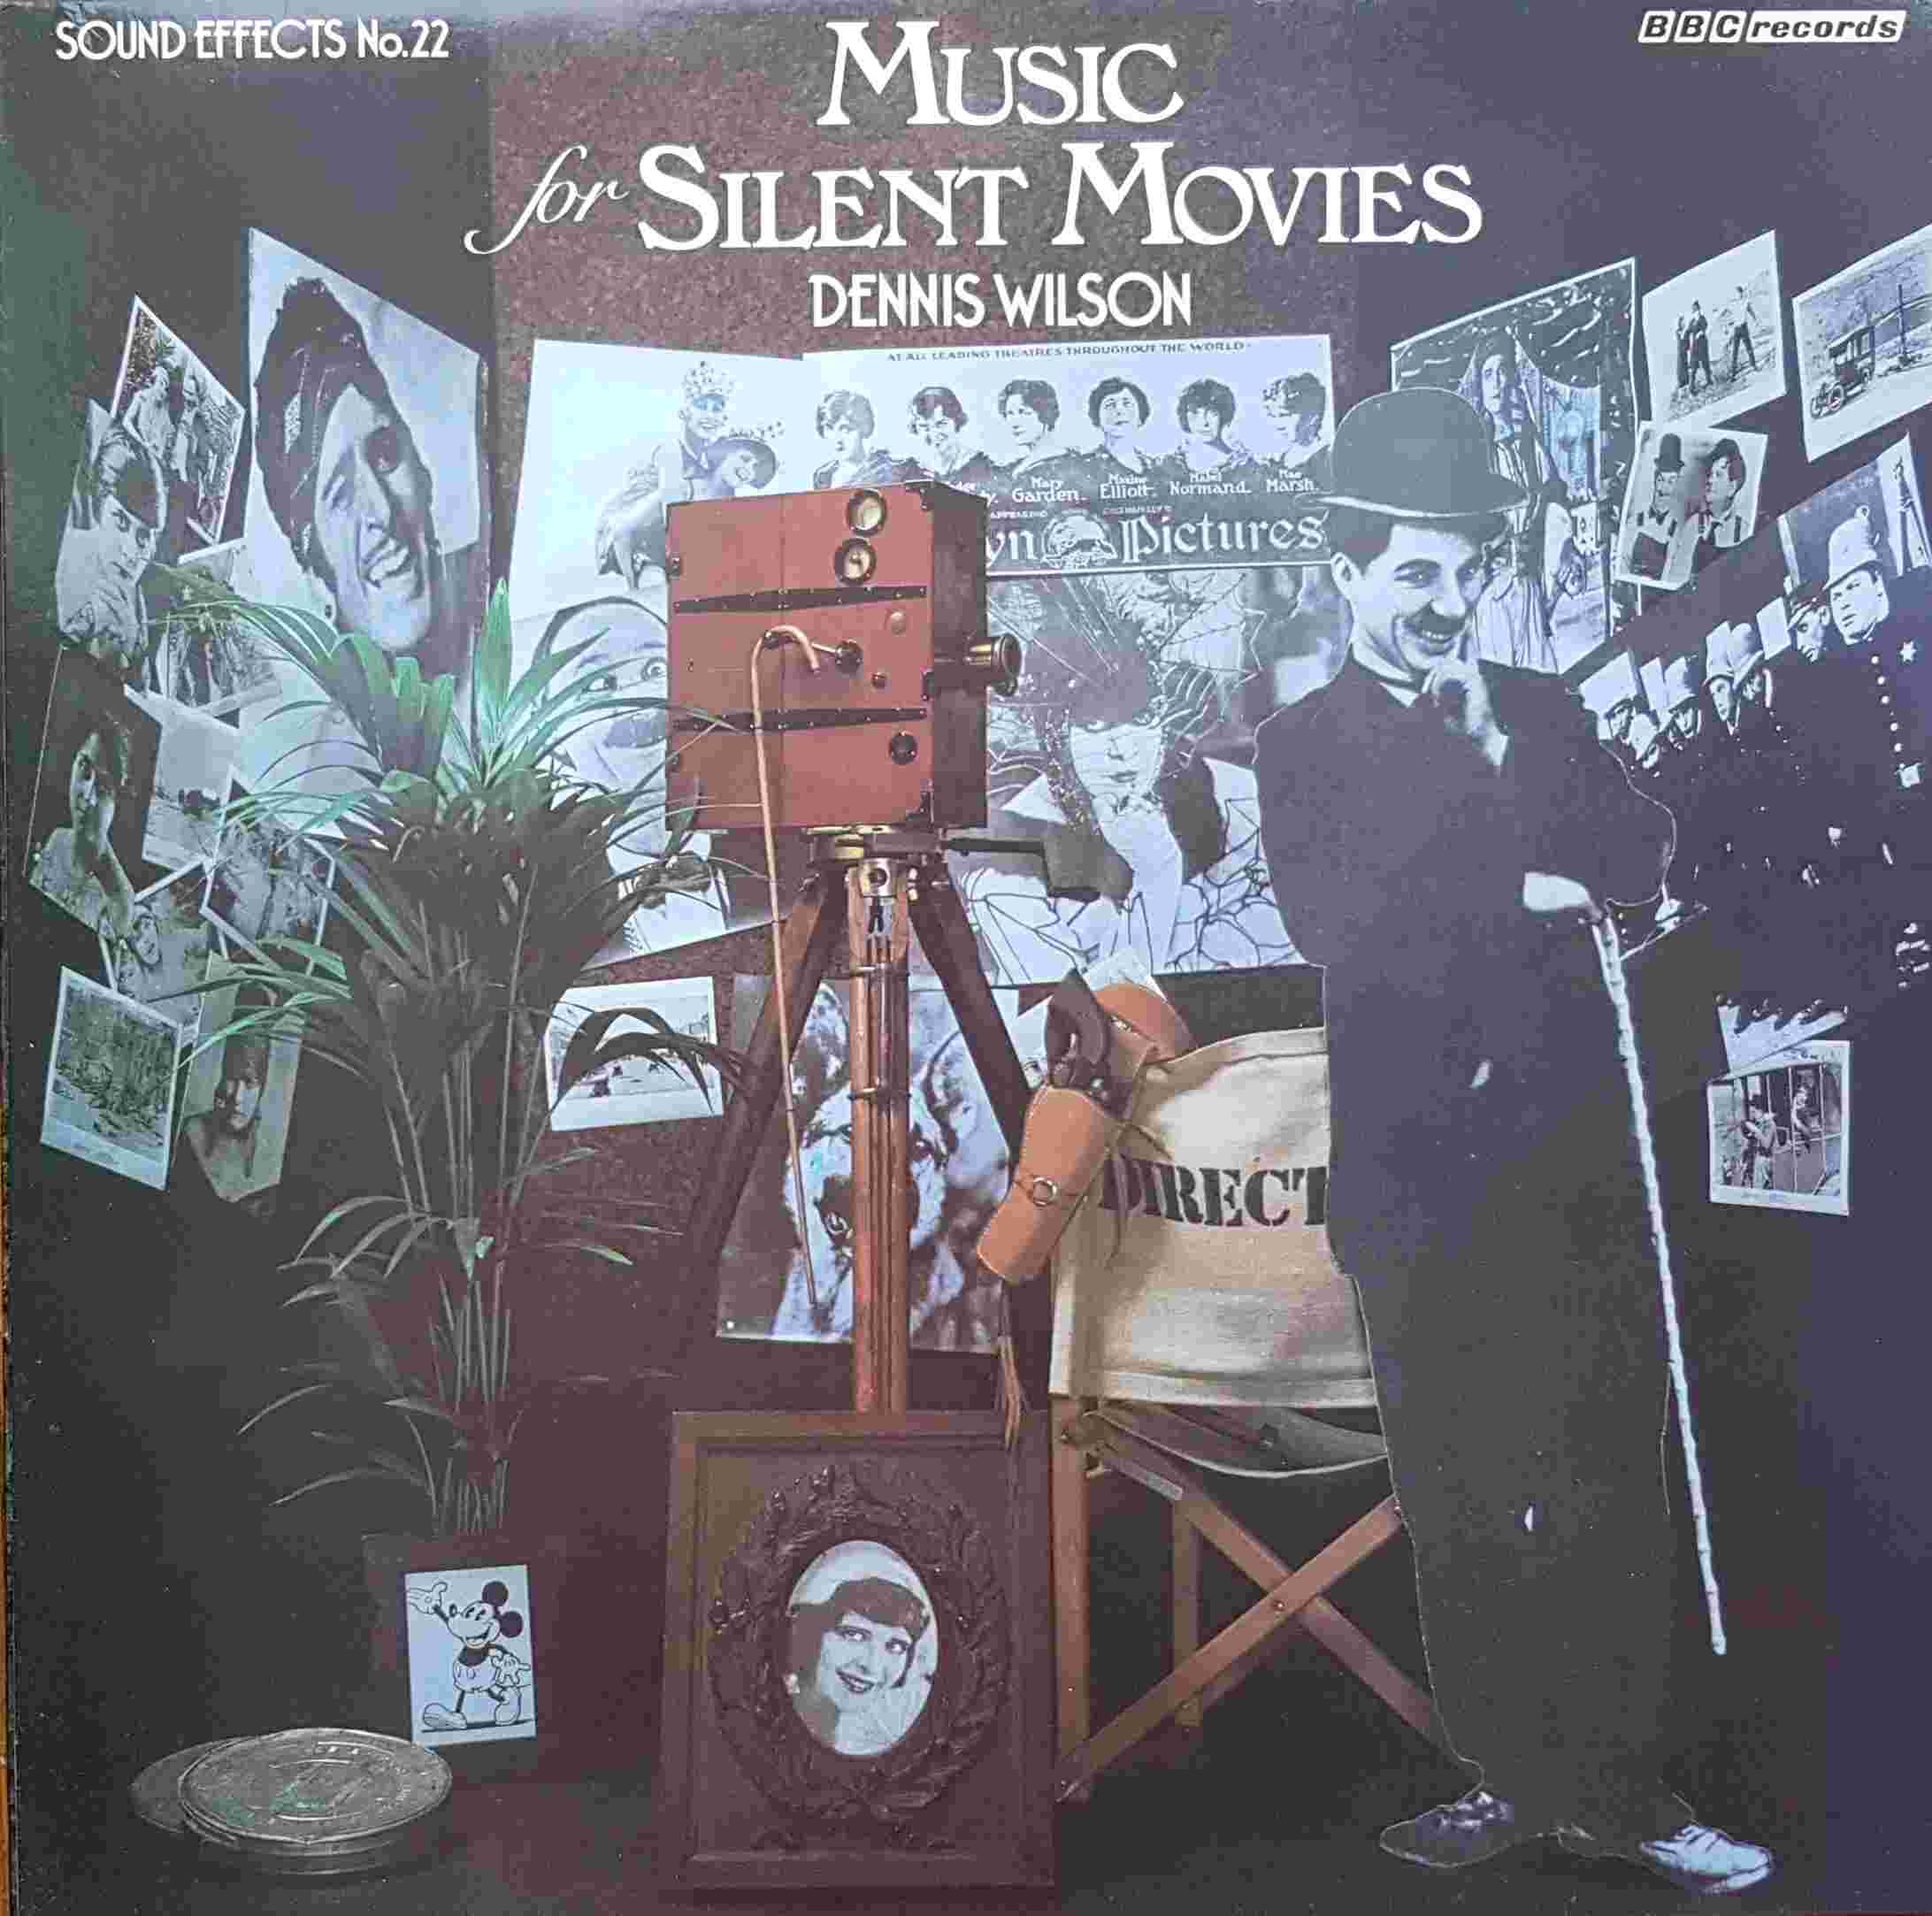 Picture of REC 347 Music for silent movies by artist Dennis Wilson from the BBC albums - Records and Tapes library